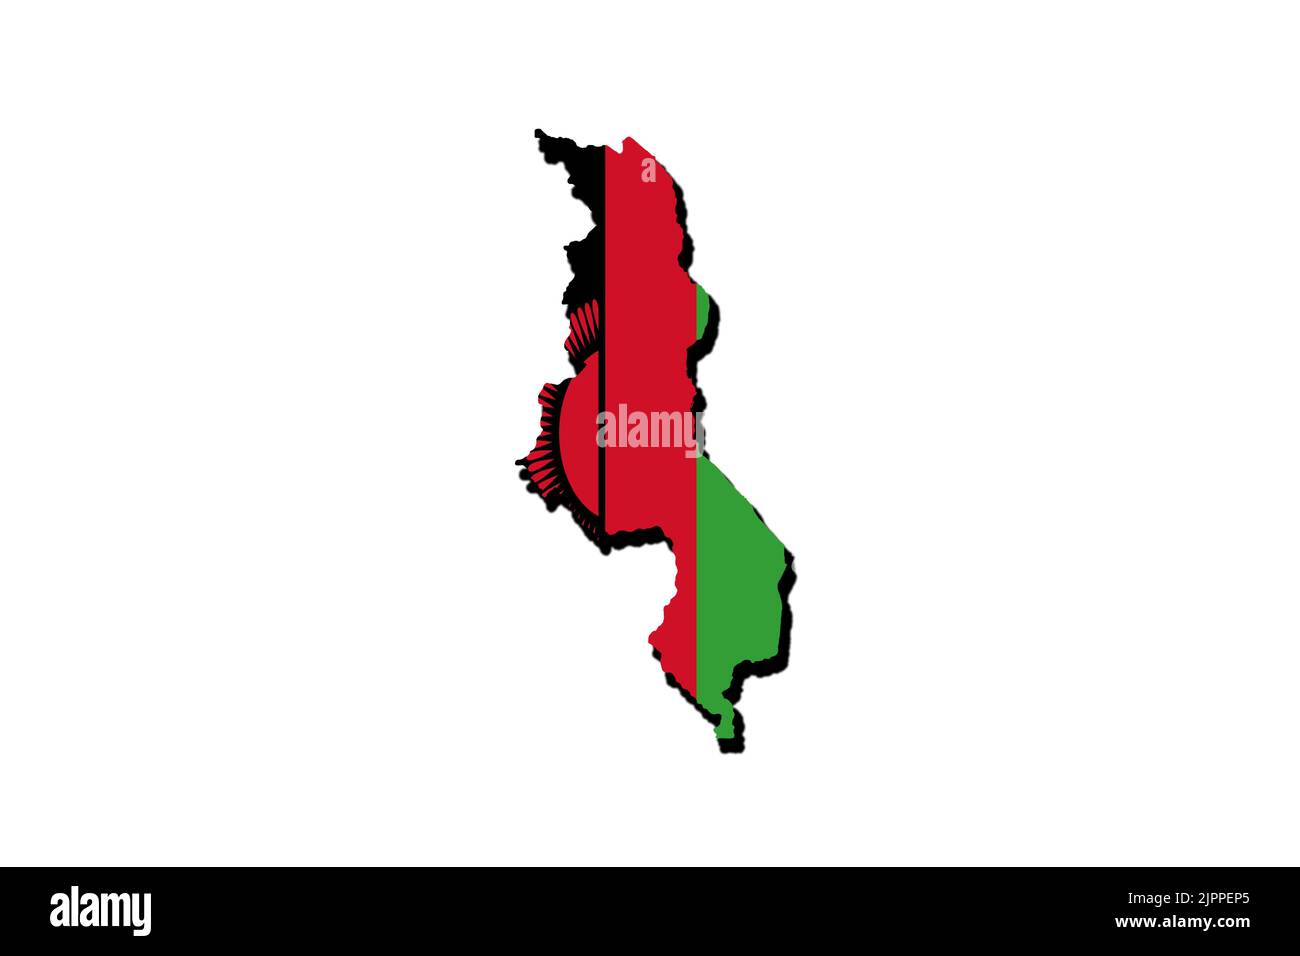 Silhouette of the map of malawi with its flag Stock Photo